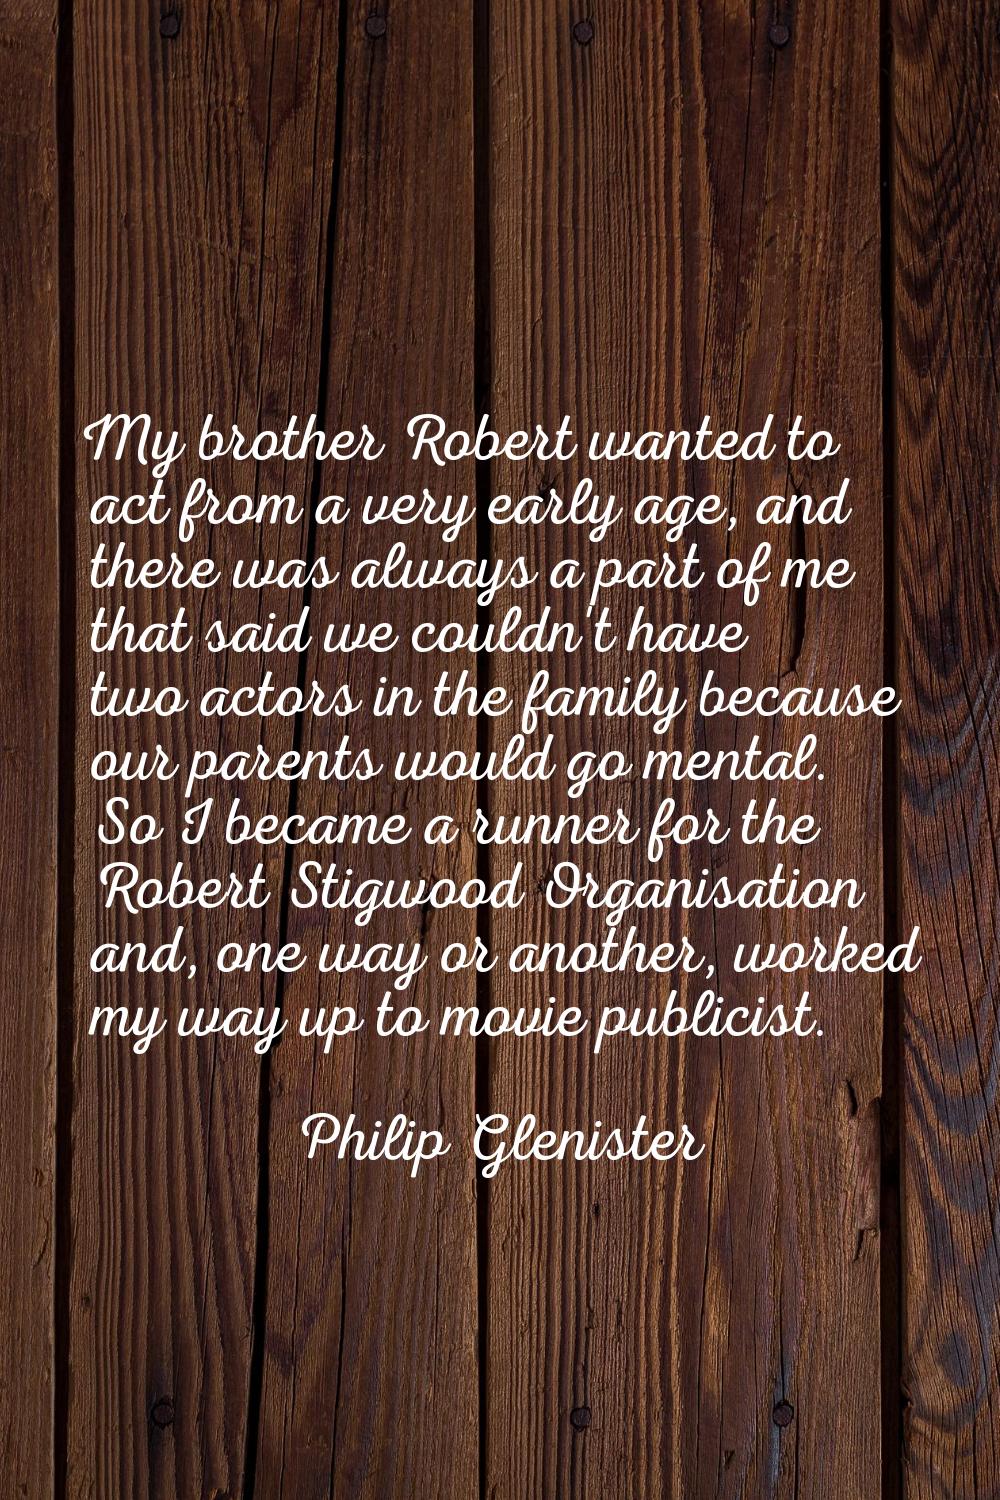 My brother Robert wanted to act from a very early age, and there was always a part of me that said 